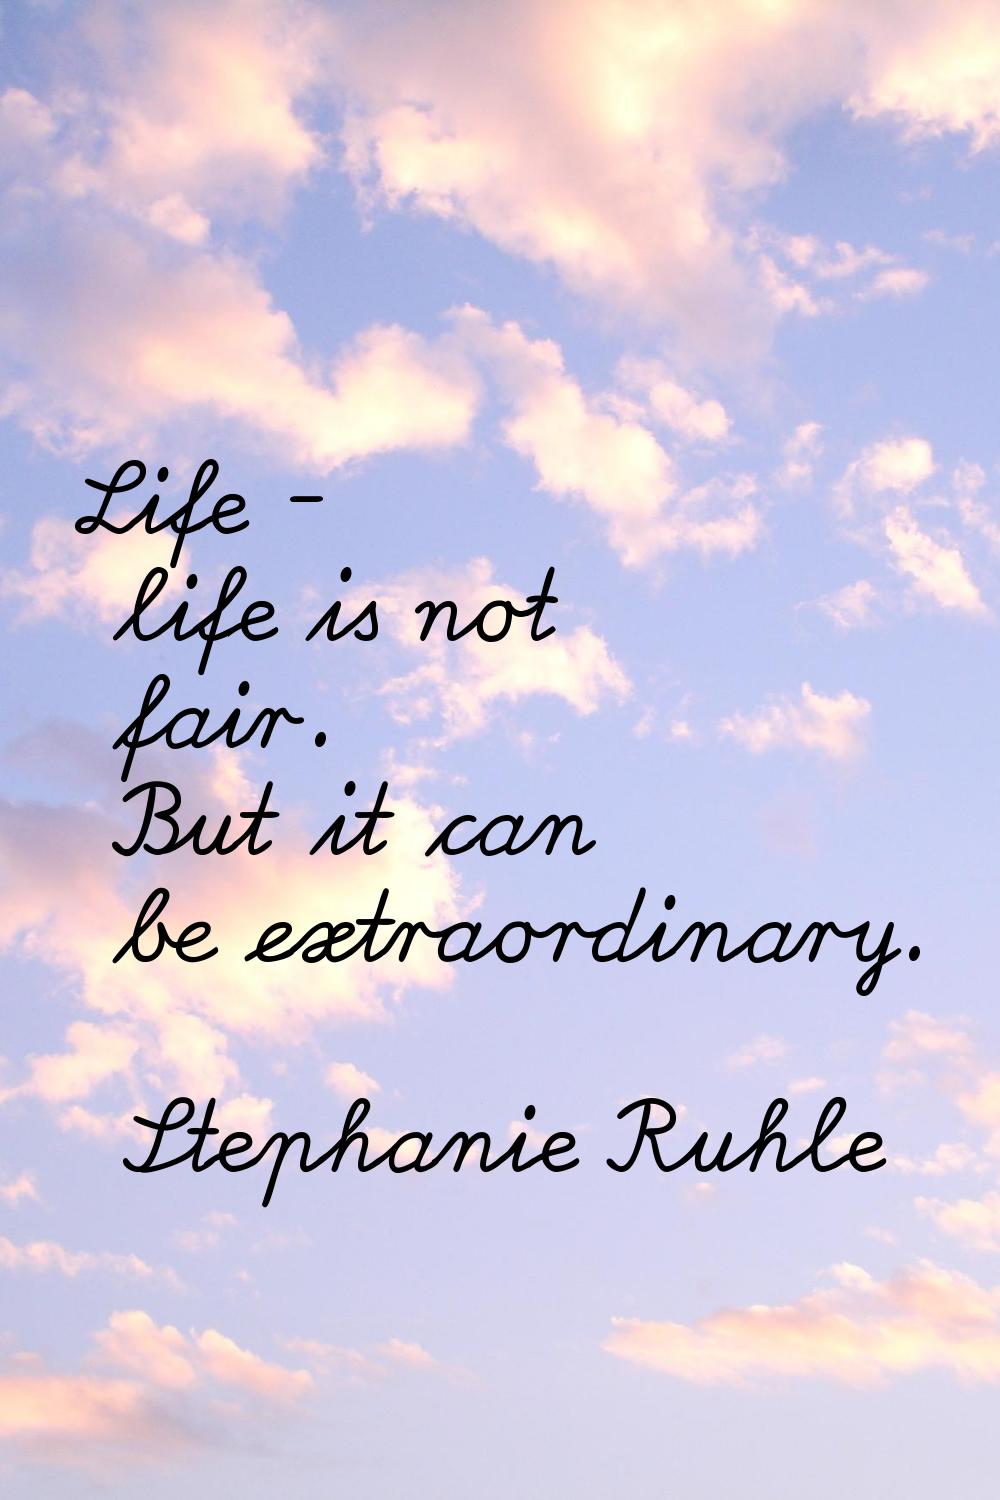 Life - life is not fair. But it can be extraordinary.